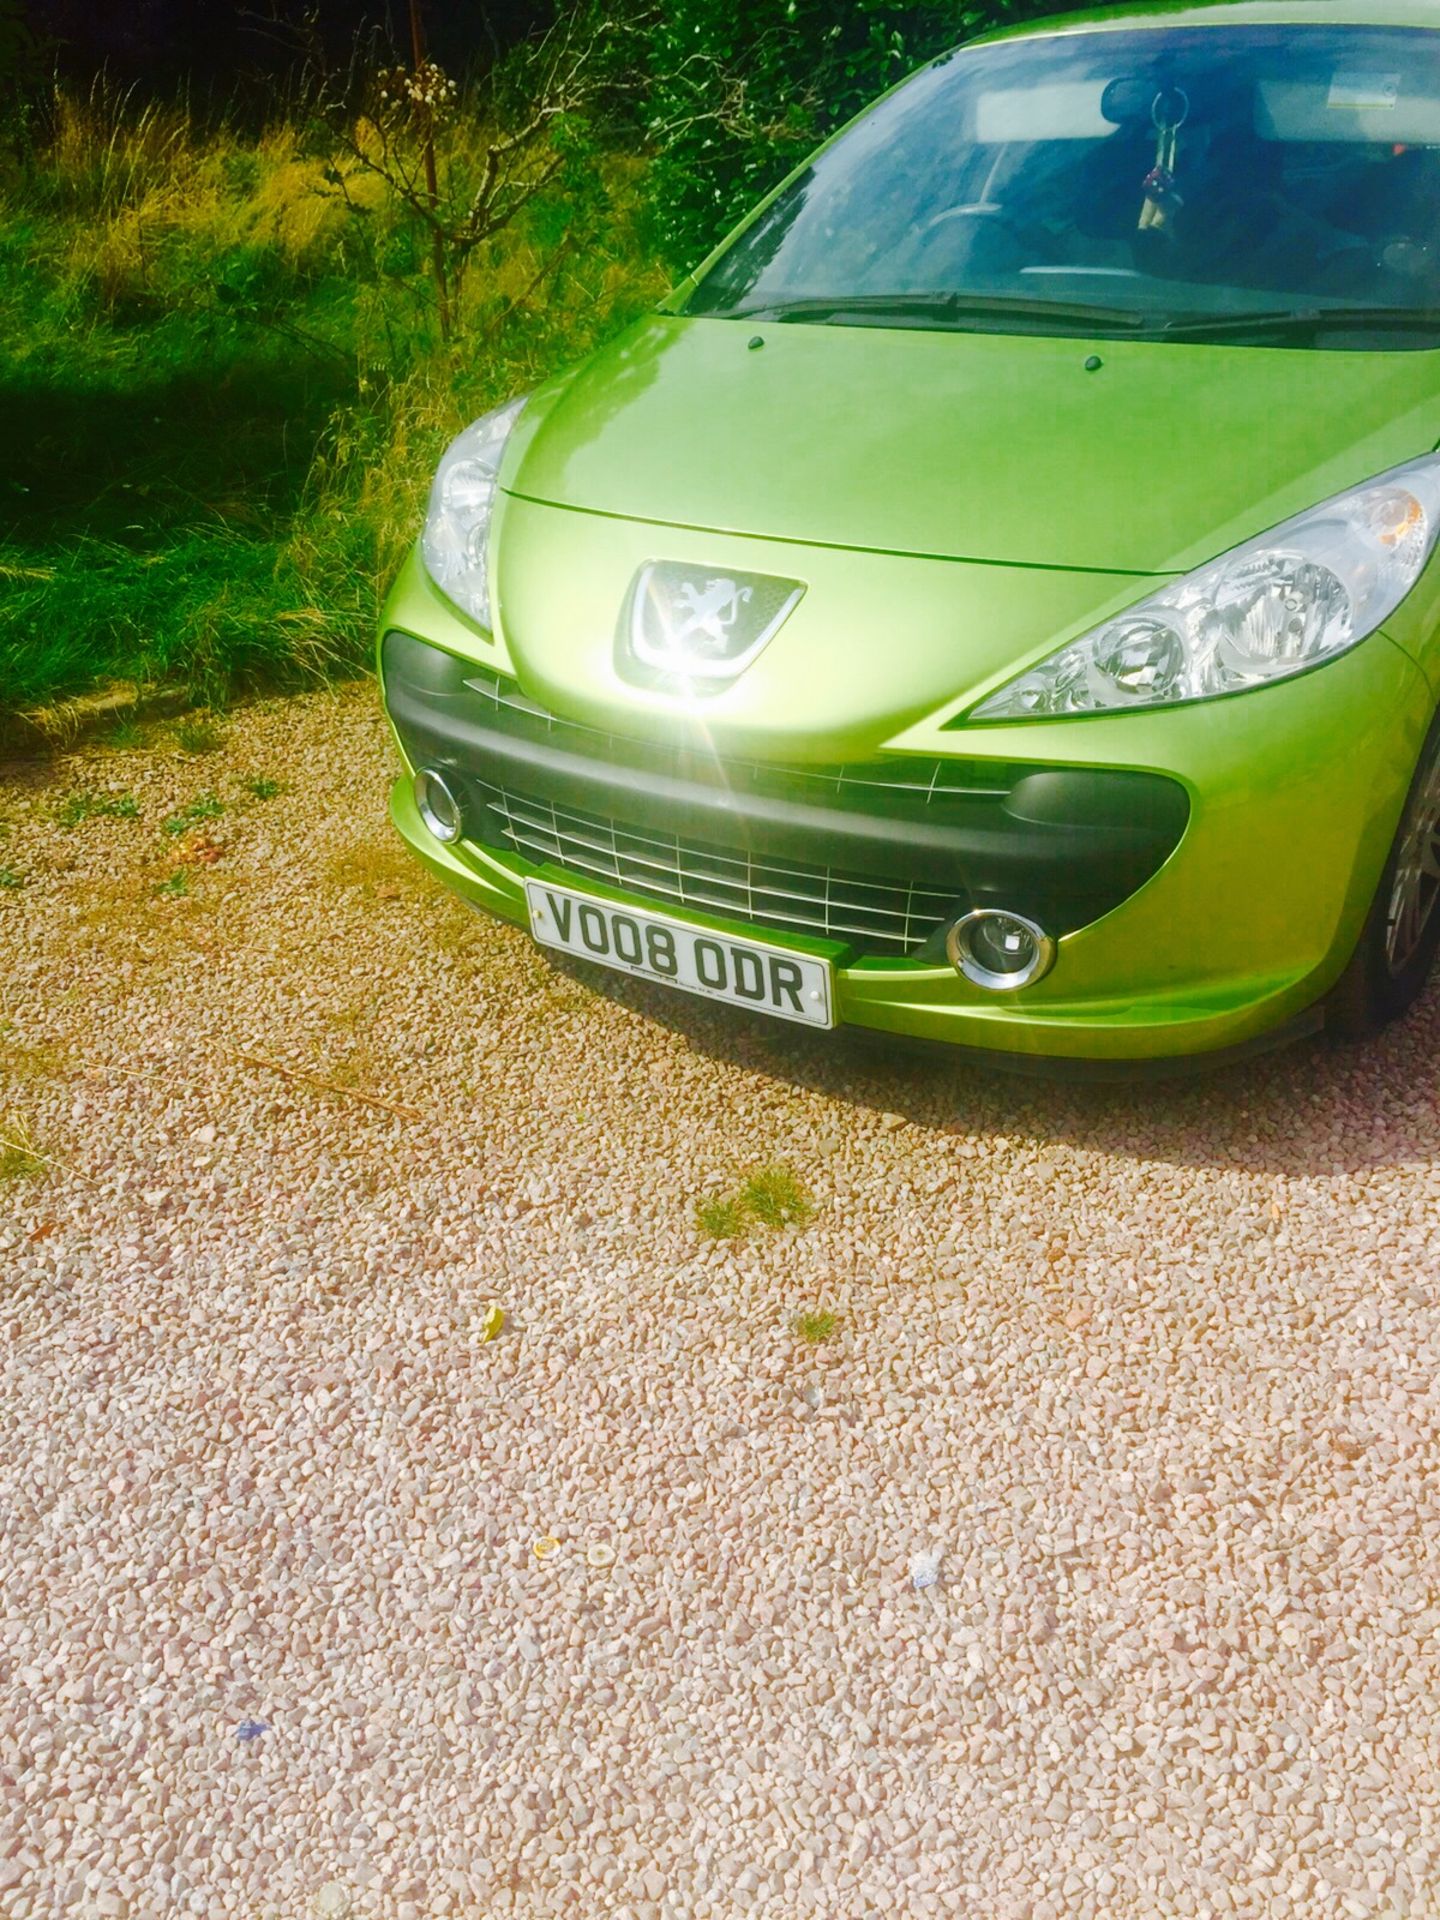 PEUGEOT 207 1.4 **M:PLAY EDITION* 5 DOOR 2008 (08) REG AIR CON*ELEC PACK* *SPECIAL EDITION*LOW MILES - Image 5 of 6